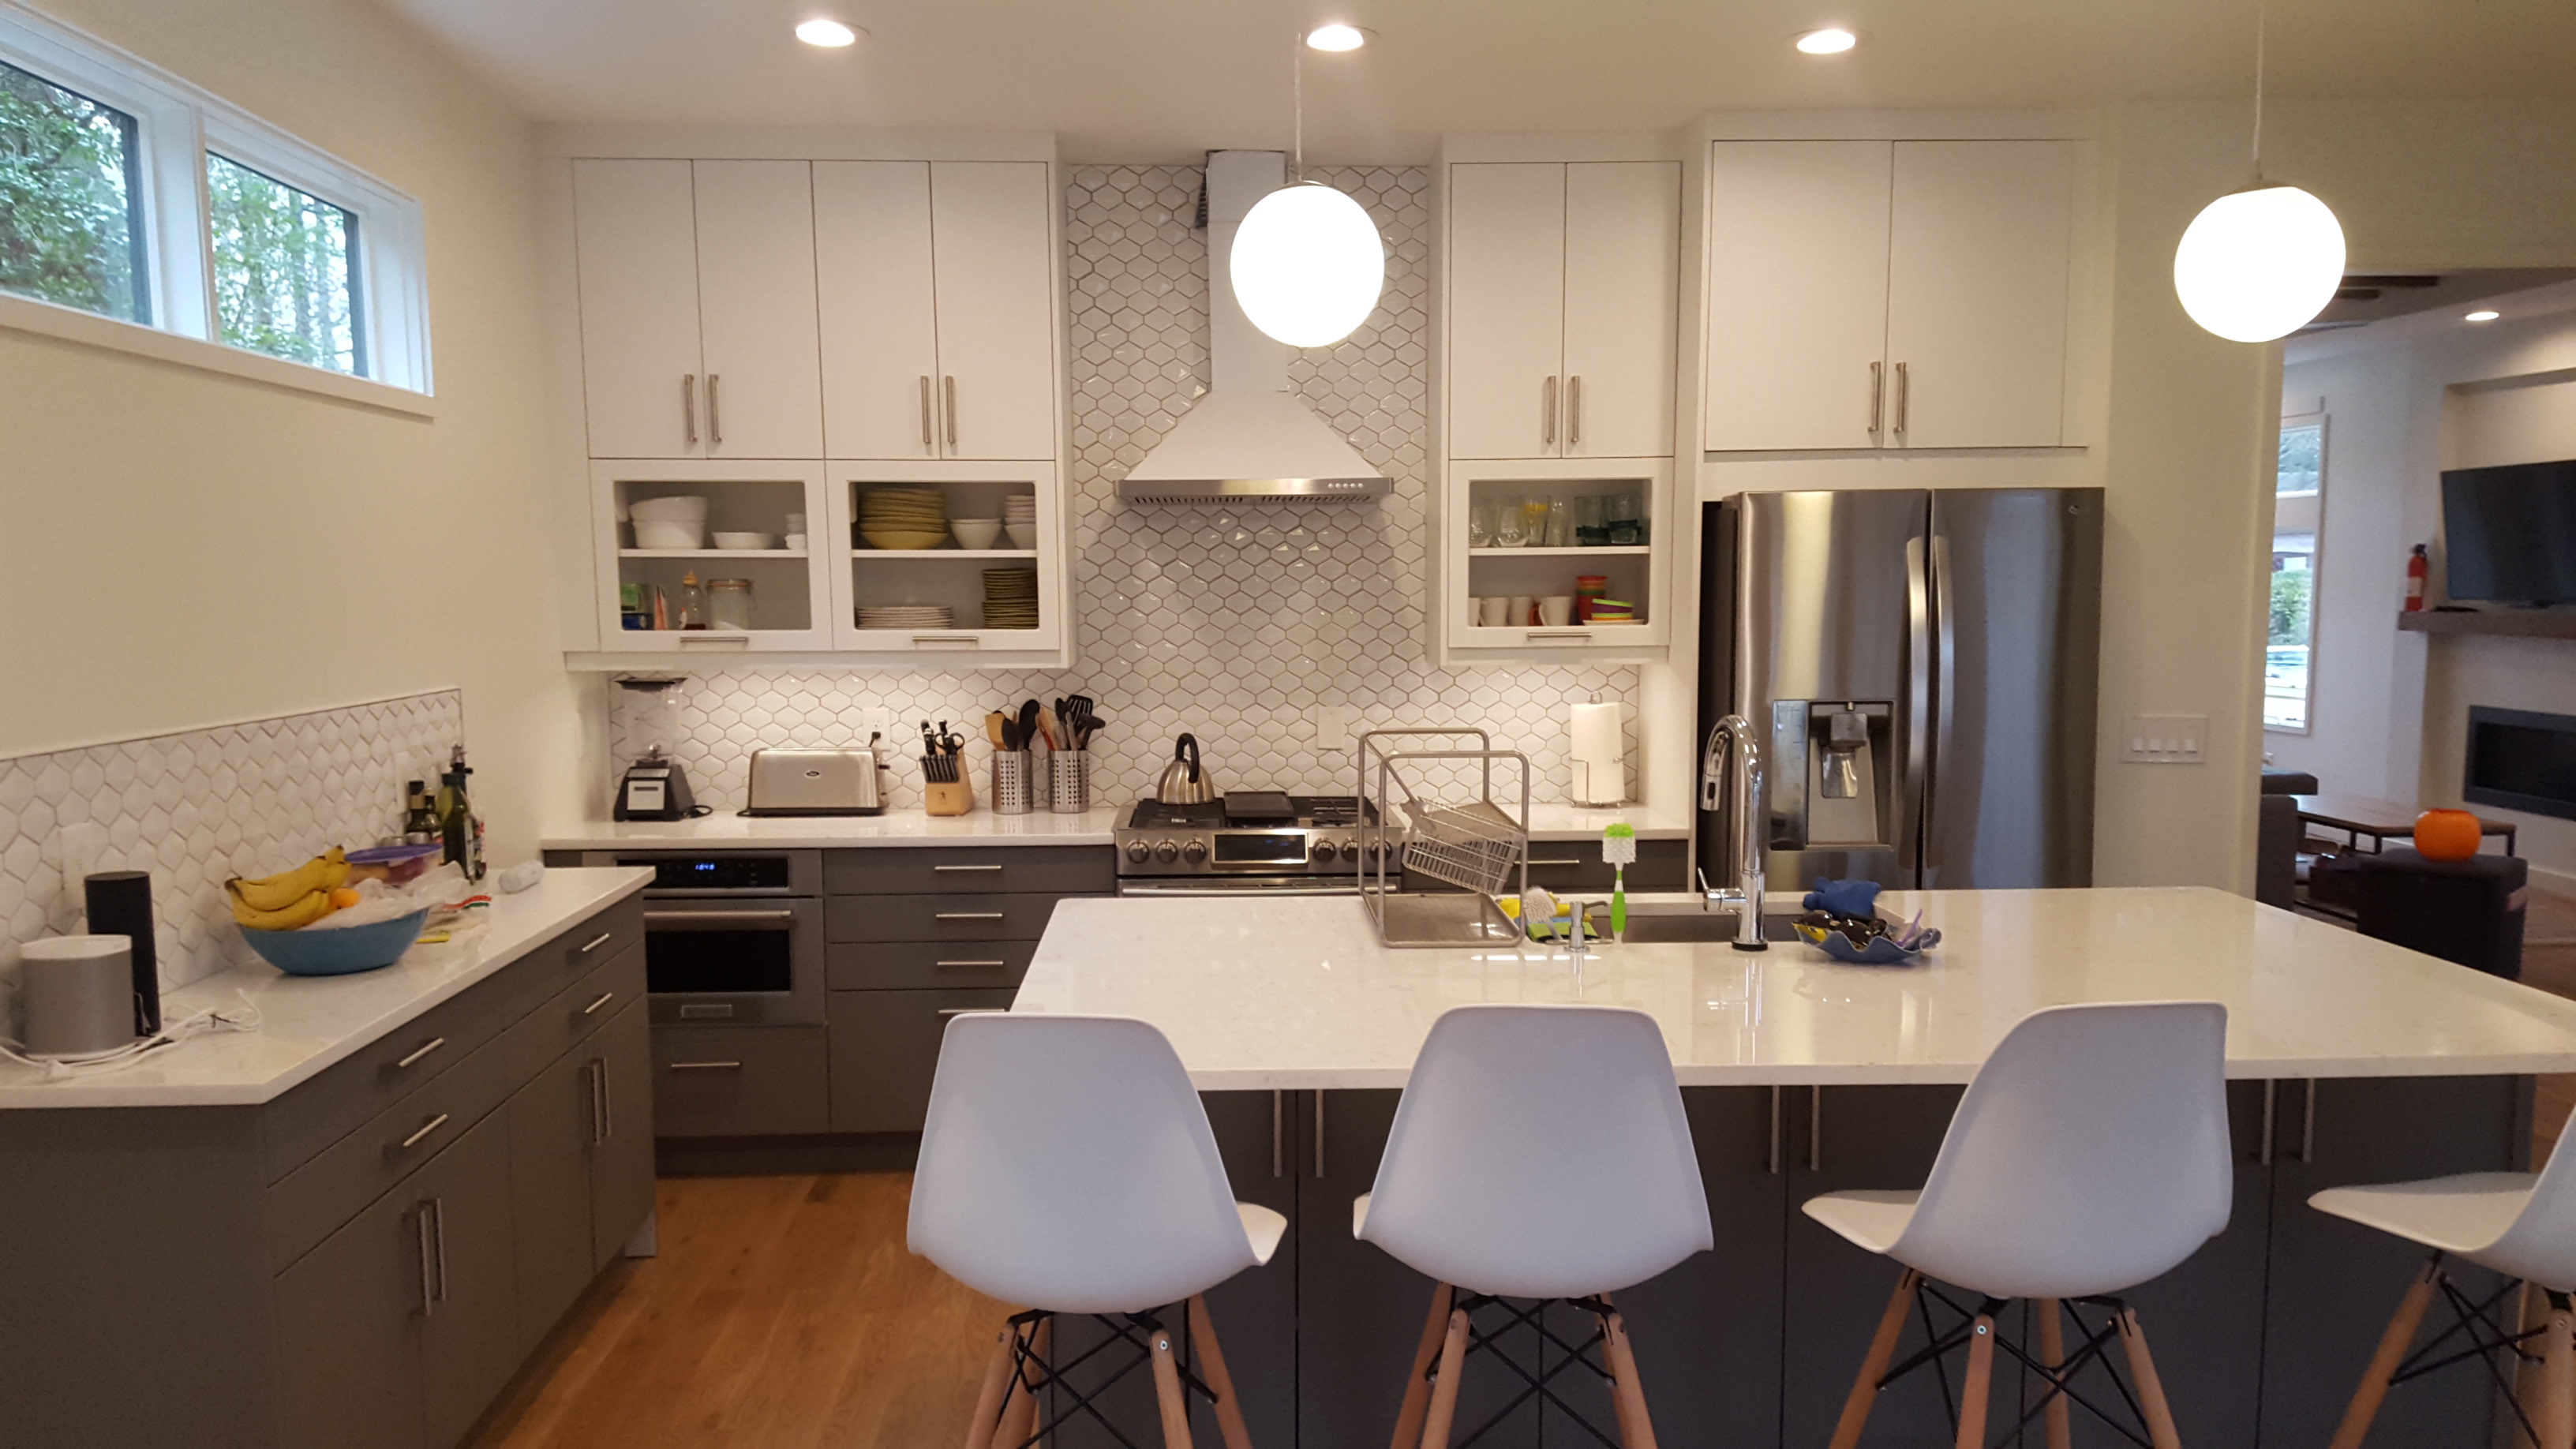 How to Get the Kitchen Design Style You Love with Affordable IKEA